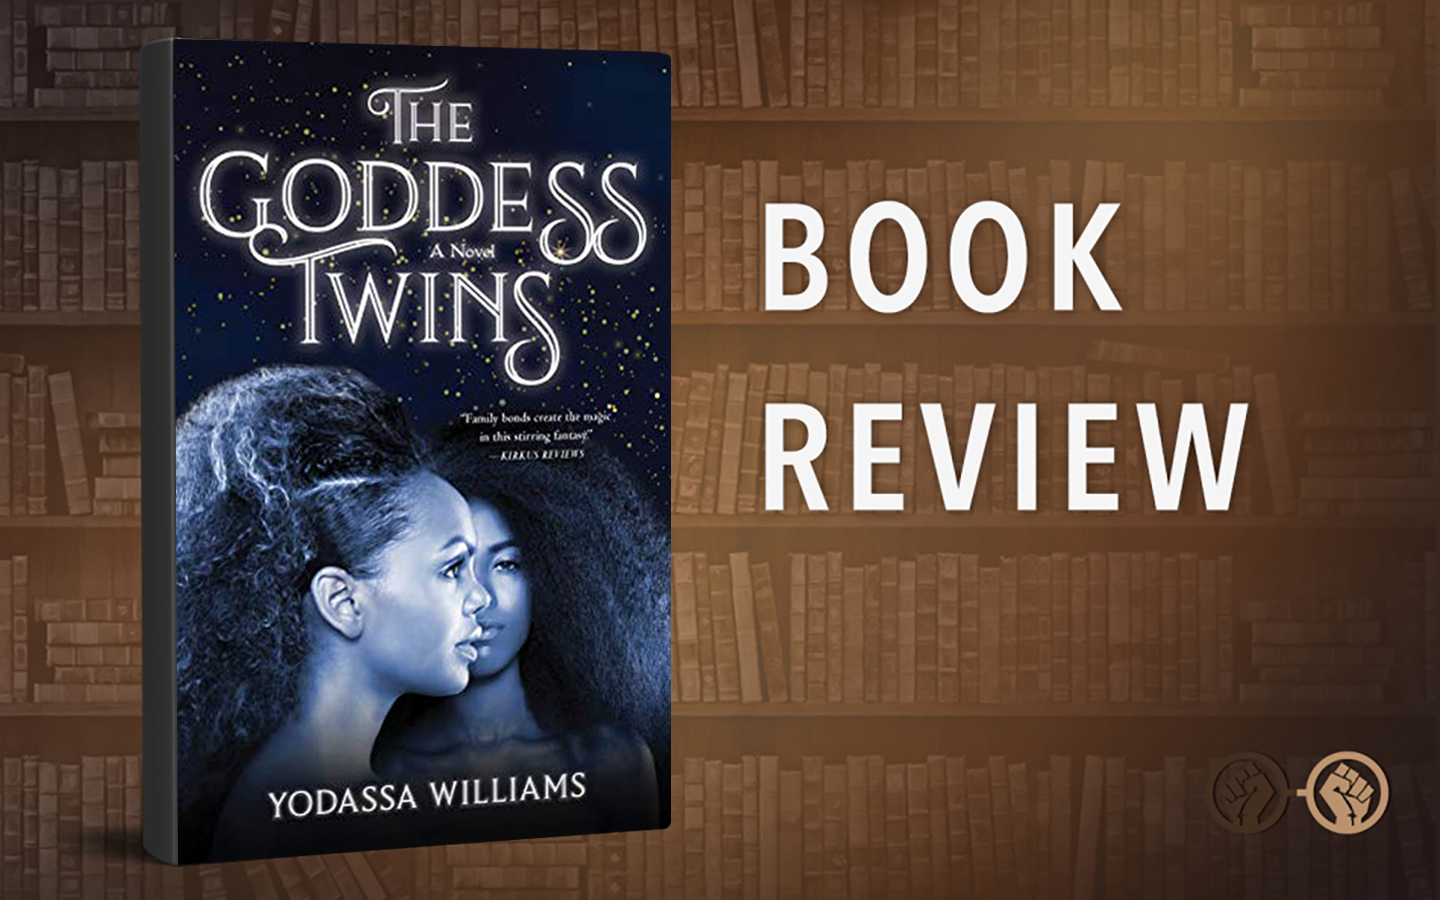 ‘The Goddess Twins’ is a Magical Debut Novel From Yodassa Williams – Book Review